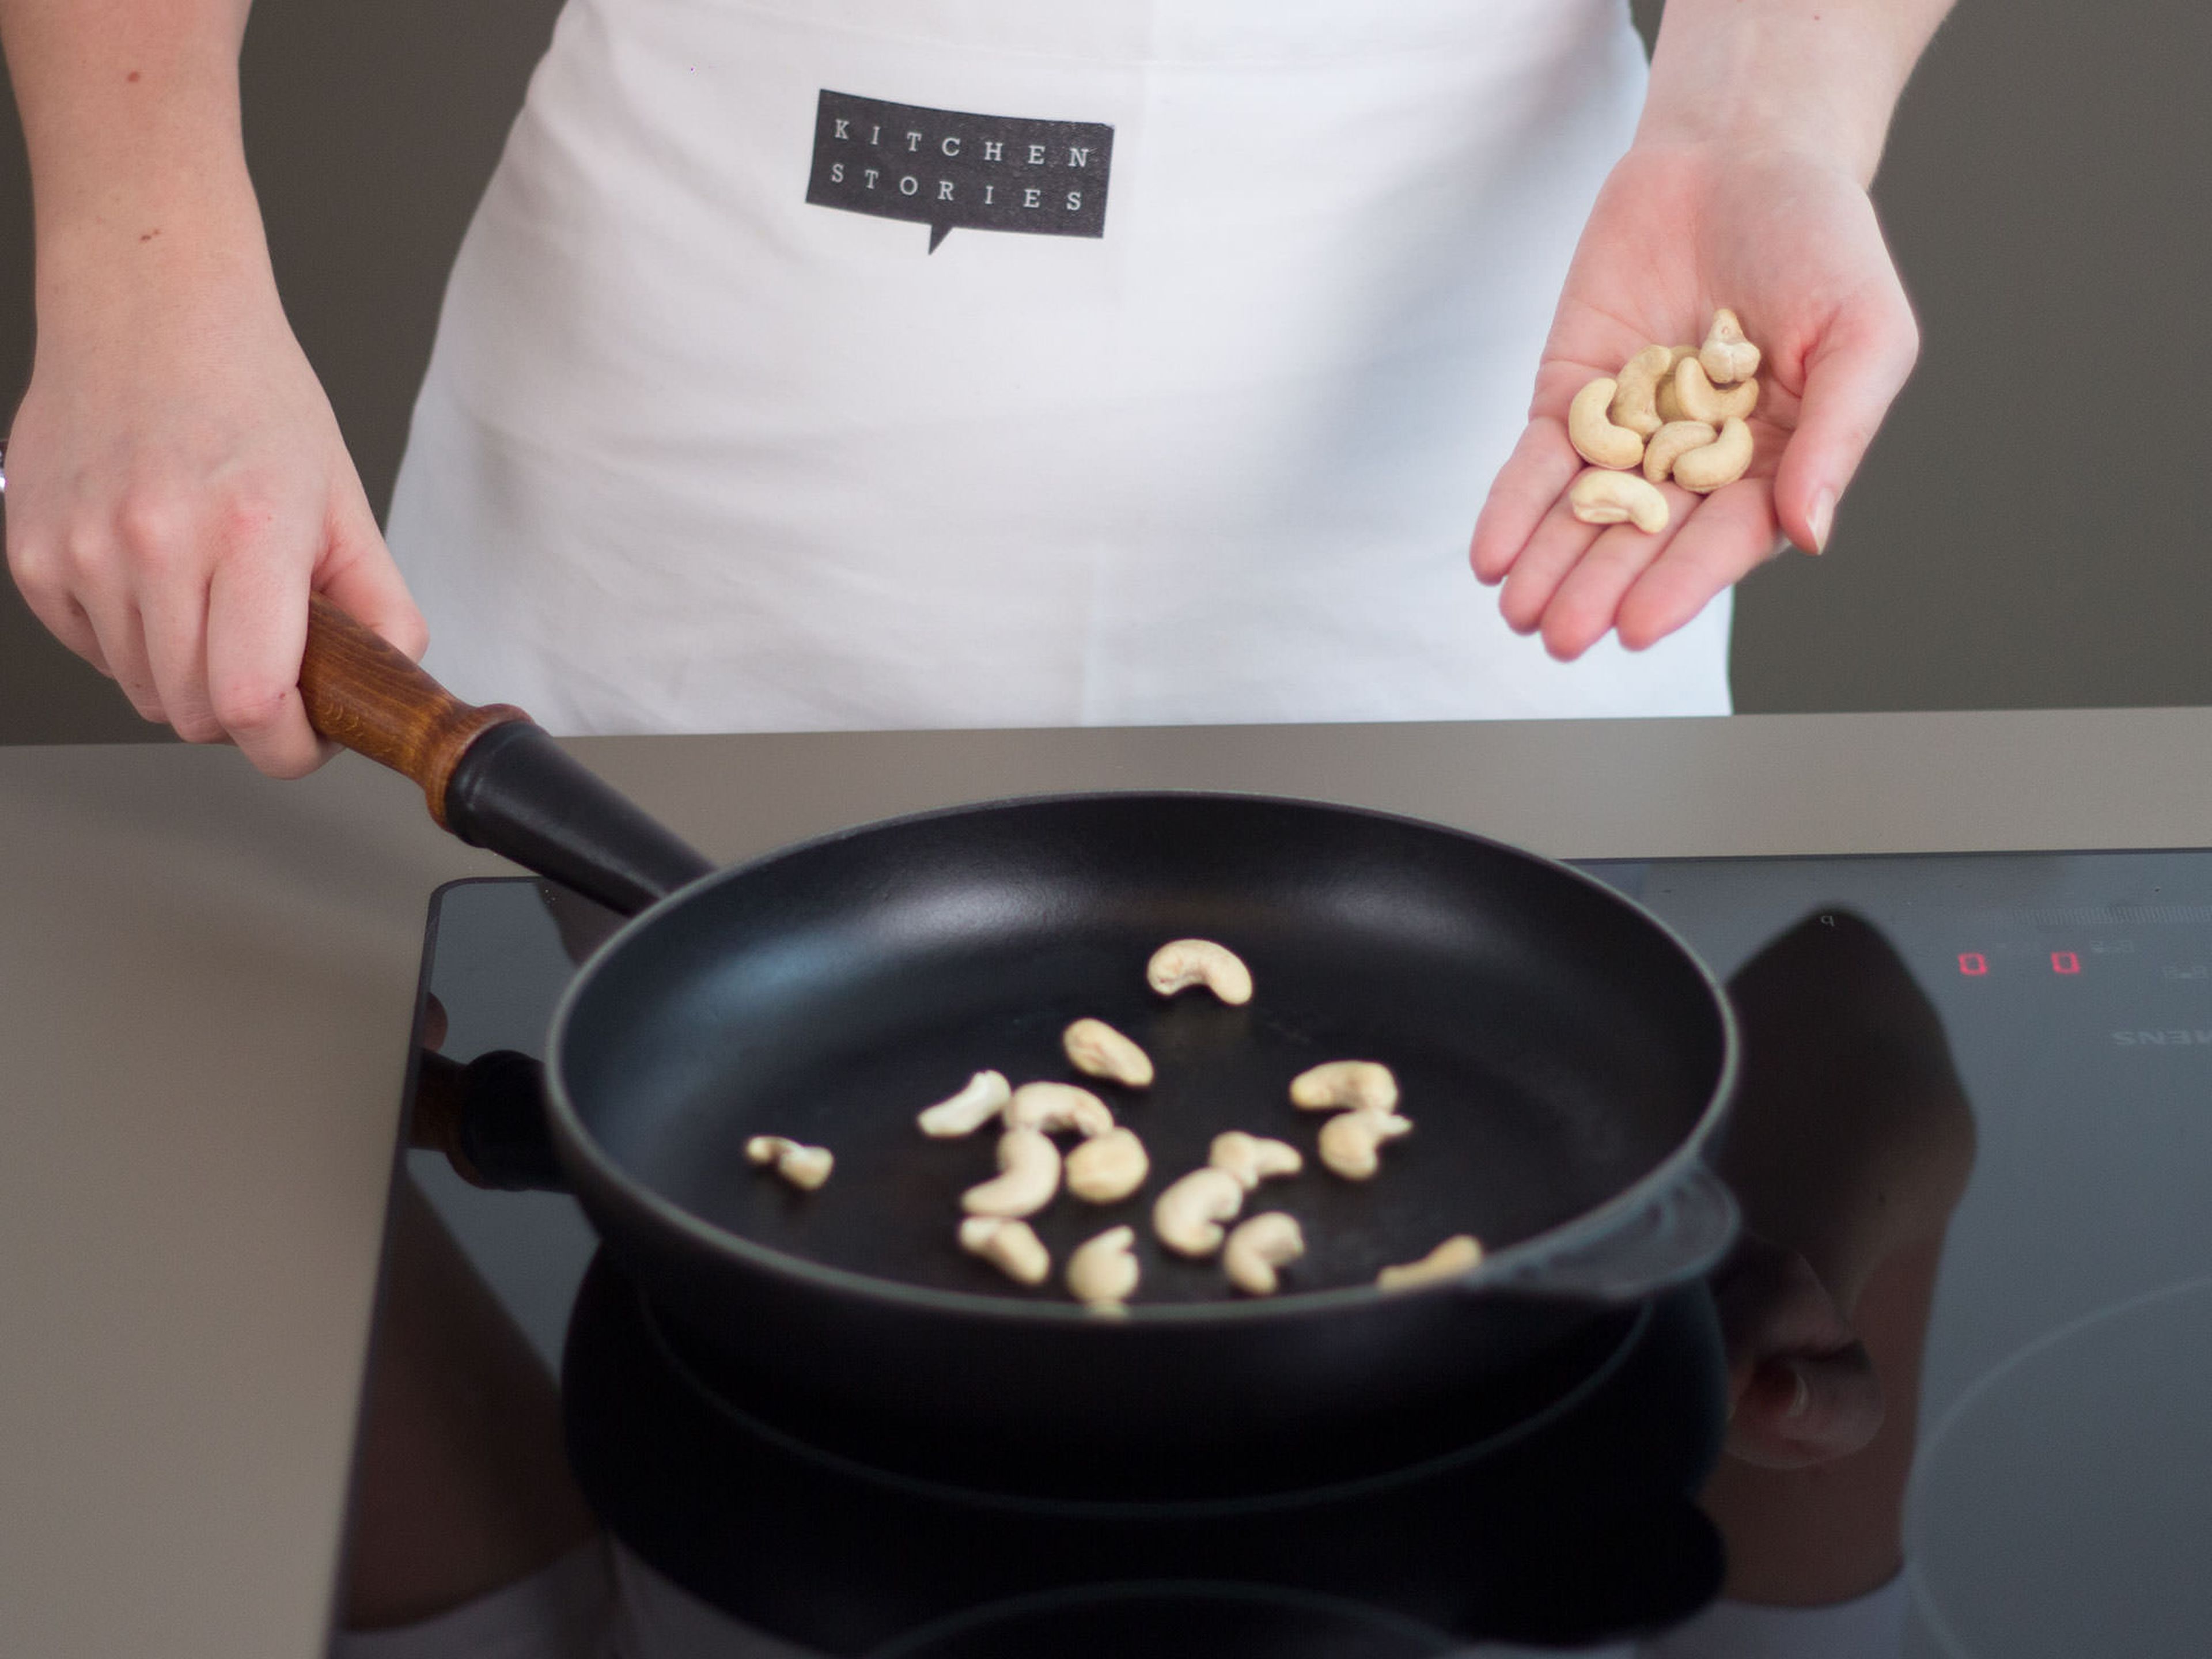 In a large, grease-free frying pan, toast cashews over medium-low heat for approx. 3 – 5 min. until fragrant and golden brown.